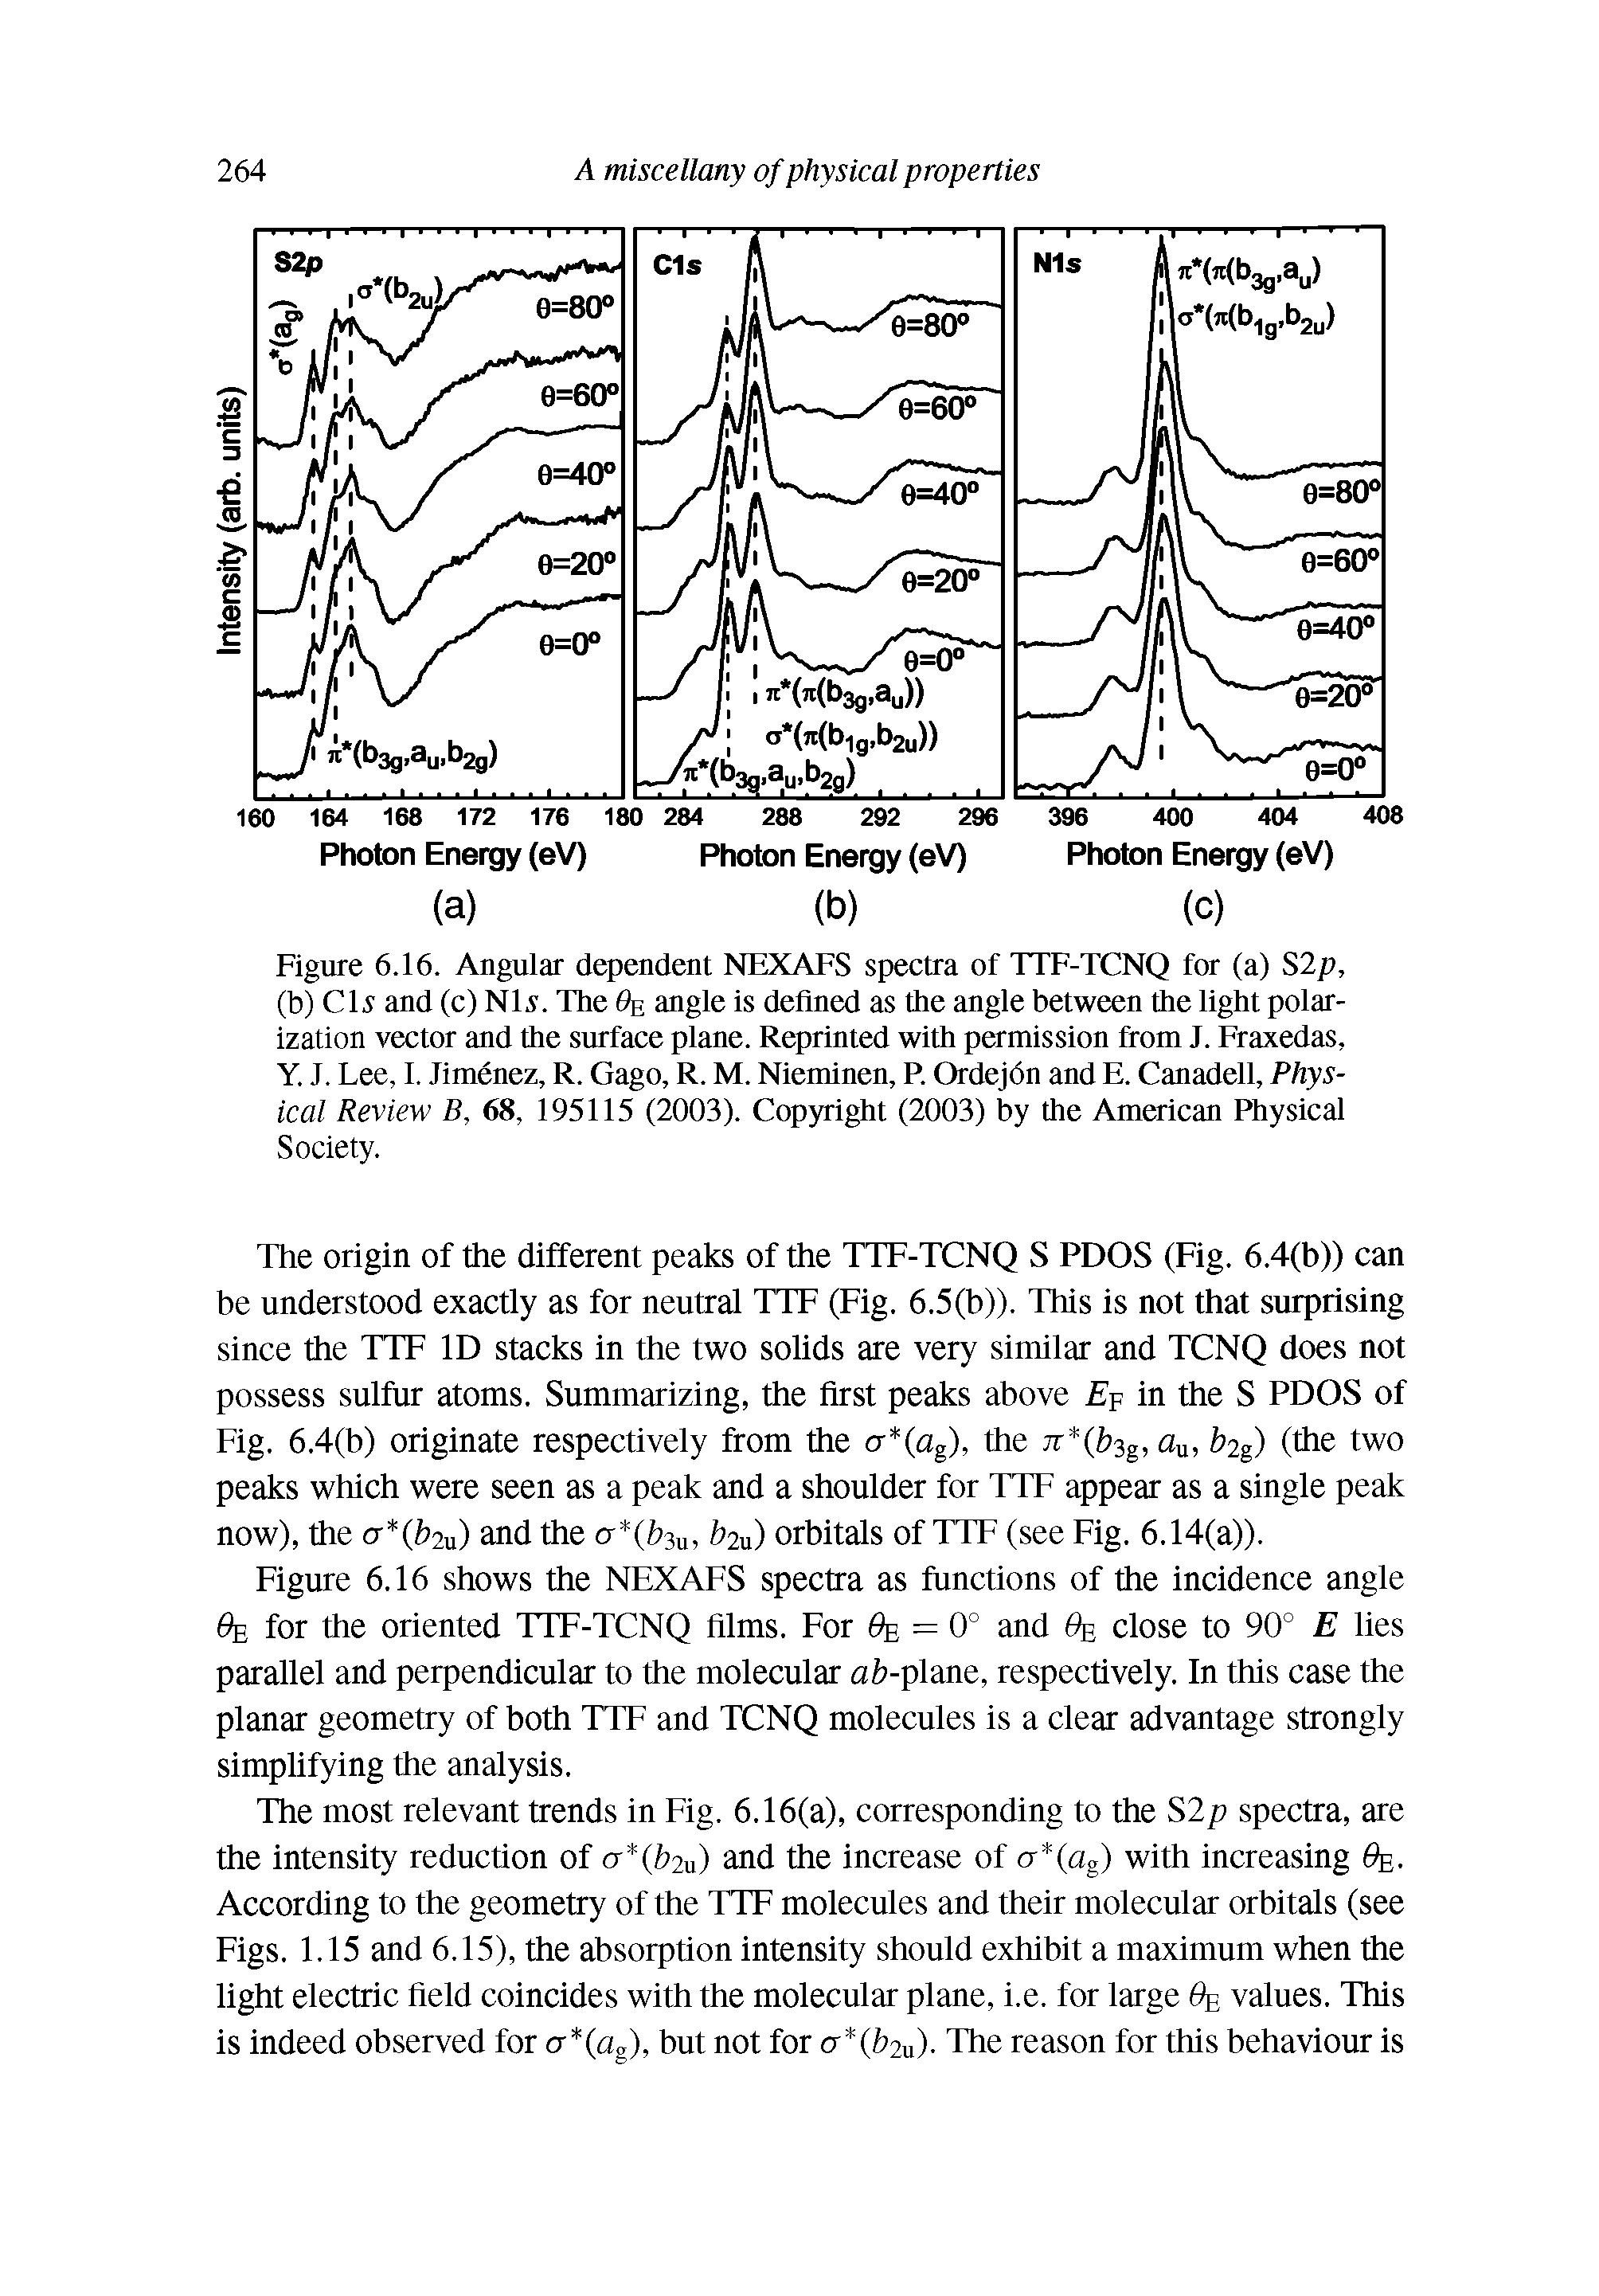 Figure 6.16. Angular dependent NEXAFS spectra of TTF-TCNQ for (a) S2p, (b) Cli and (c) Nl. The e angle is defined as the angle between the light polarization vector and the surface plane. Reprinted with permission from J. Fraxedas, Y. J. Lee, 1. Jimenez, R. Gago, R. M. Nieminen, R Ordejdn and E. Canadell, Physical Review B, 68, 195115 (2003). Copyright (2003) by the American Physical Society.